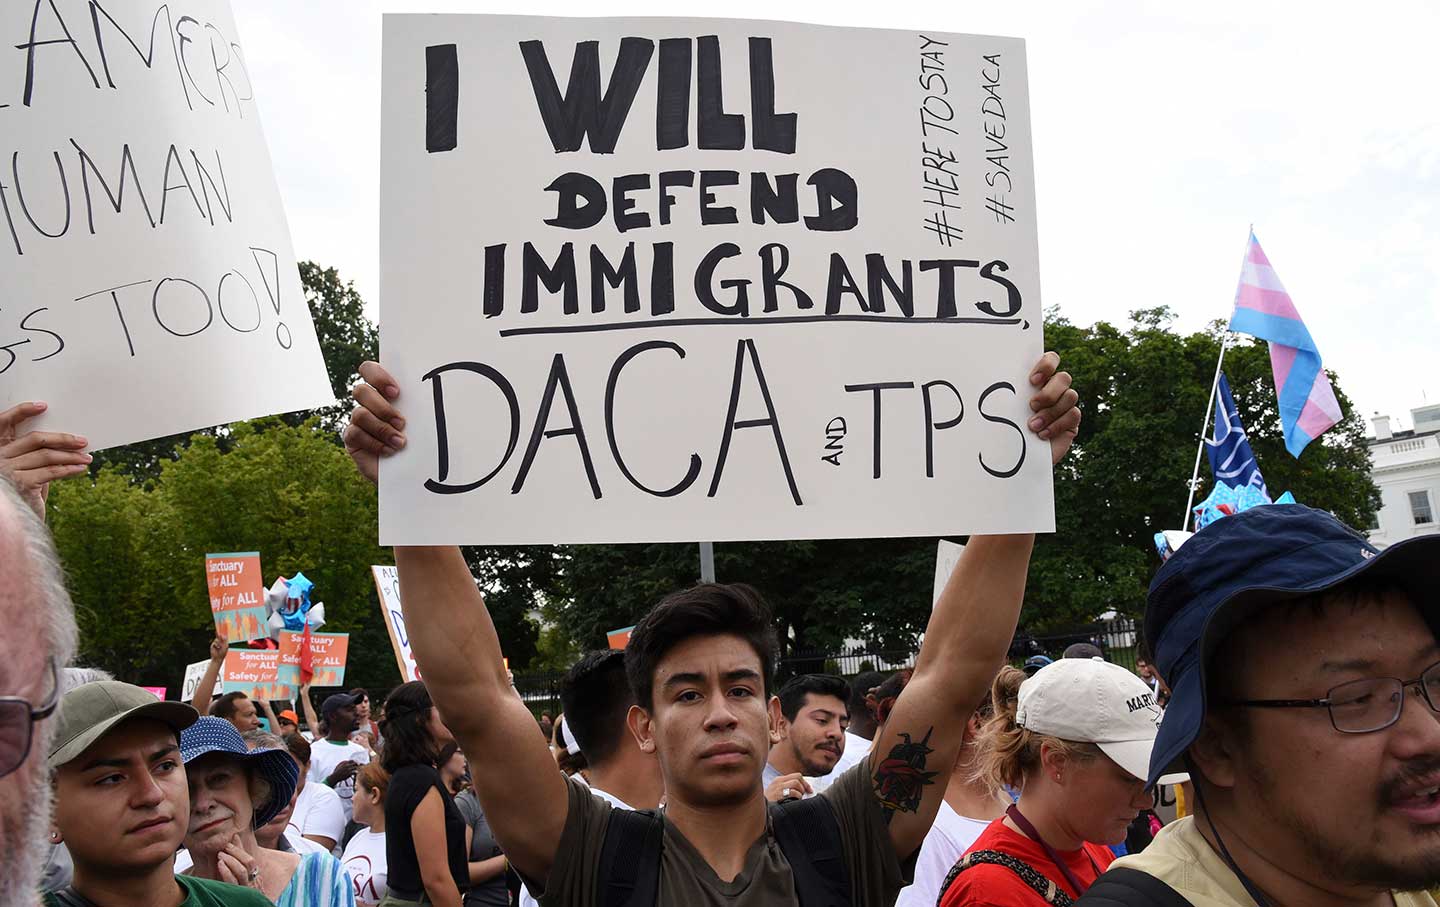 We Need Everyone to Act Now to Fight for DACA